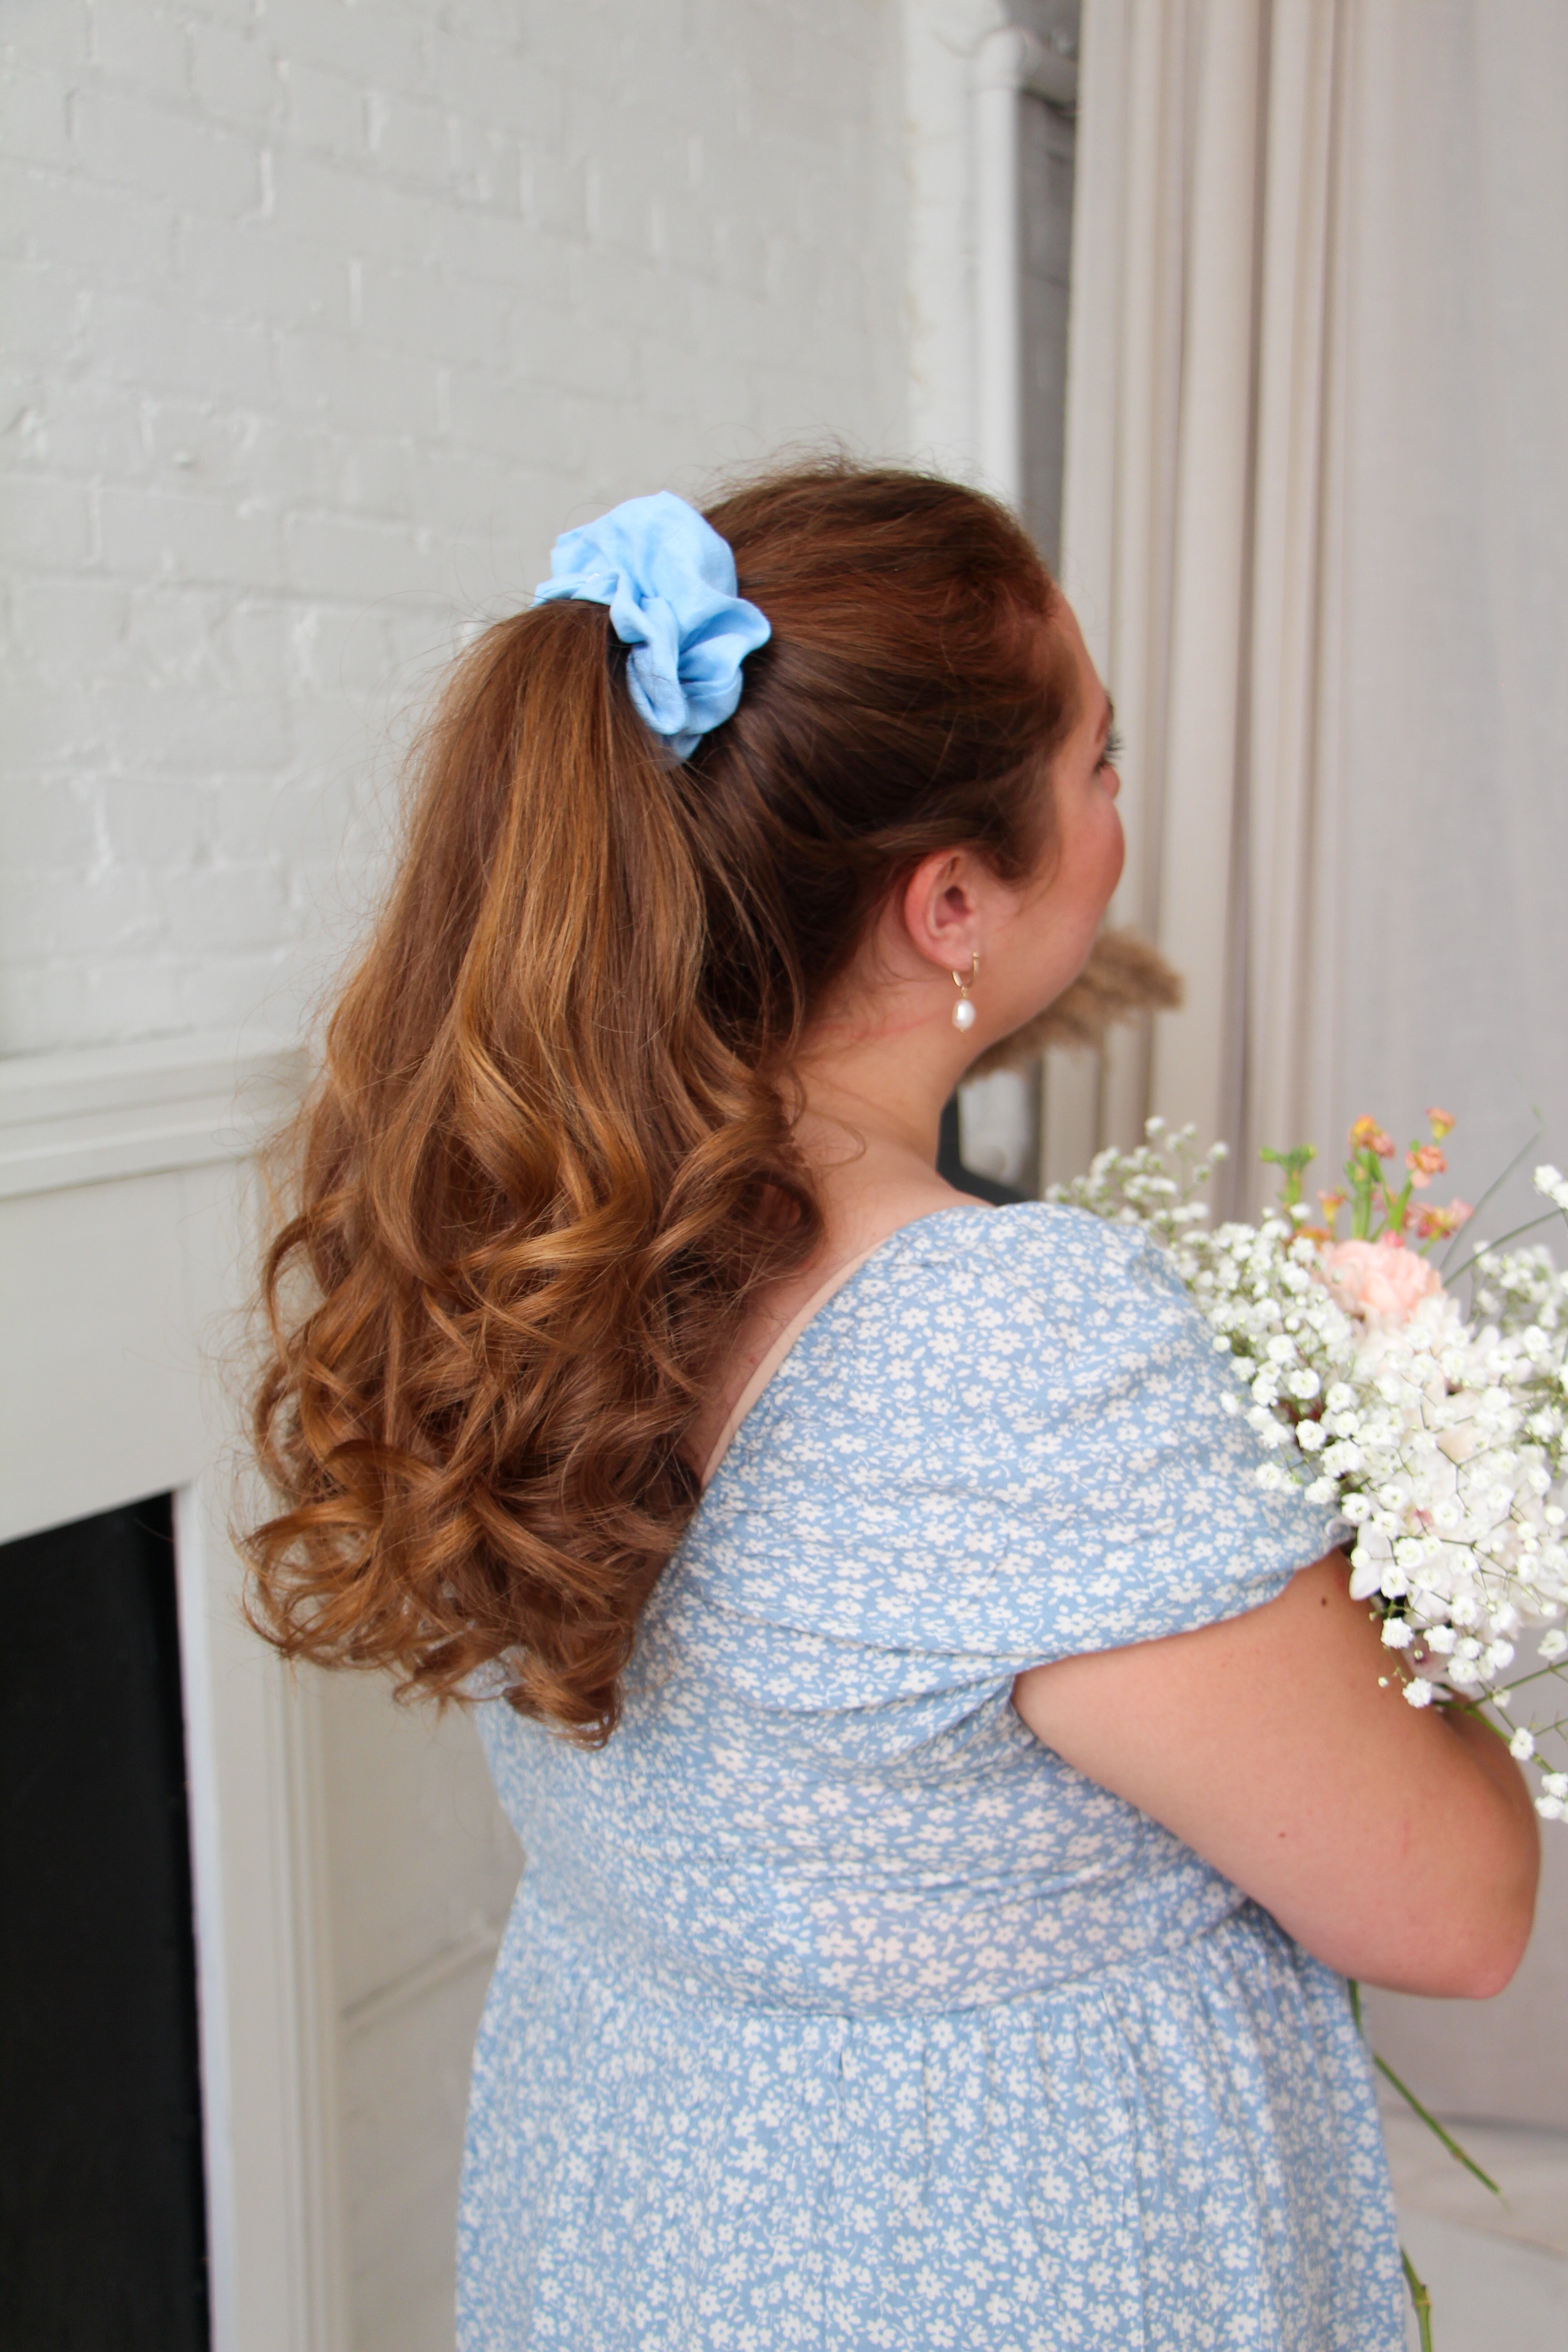 Baby Blue Linen Scrunchie in Model's ponytail. Model is wearing a baby blue floral short sleeve dress and holding spring flowers in her arms